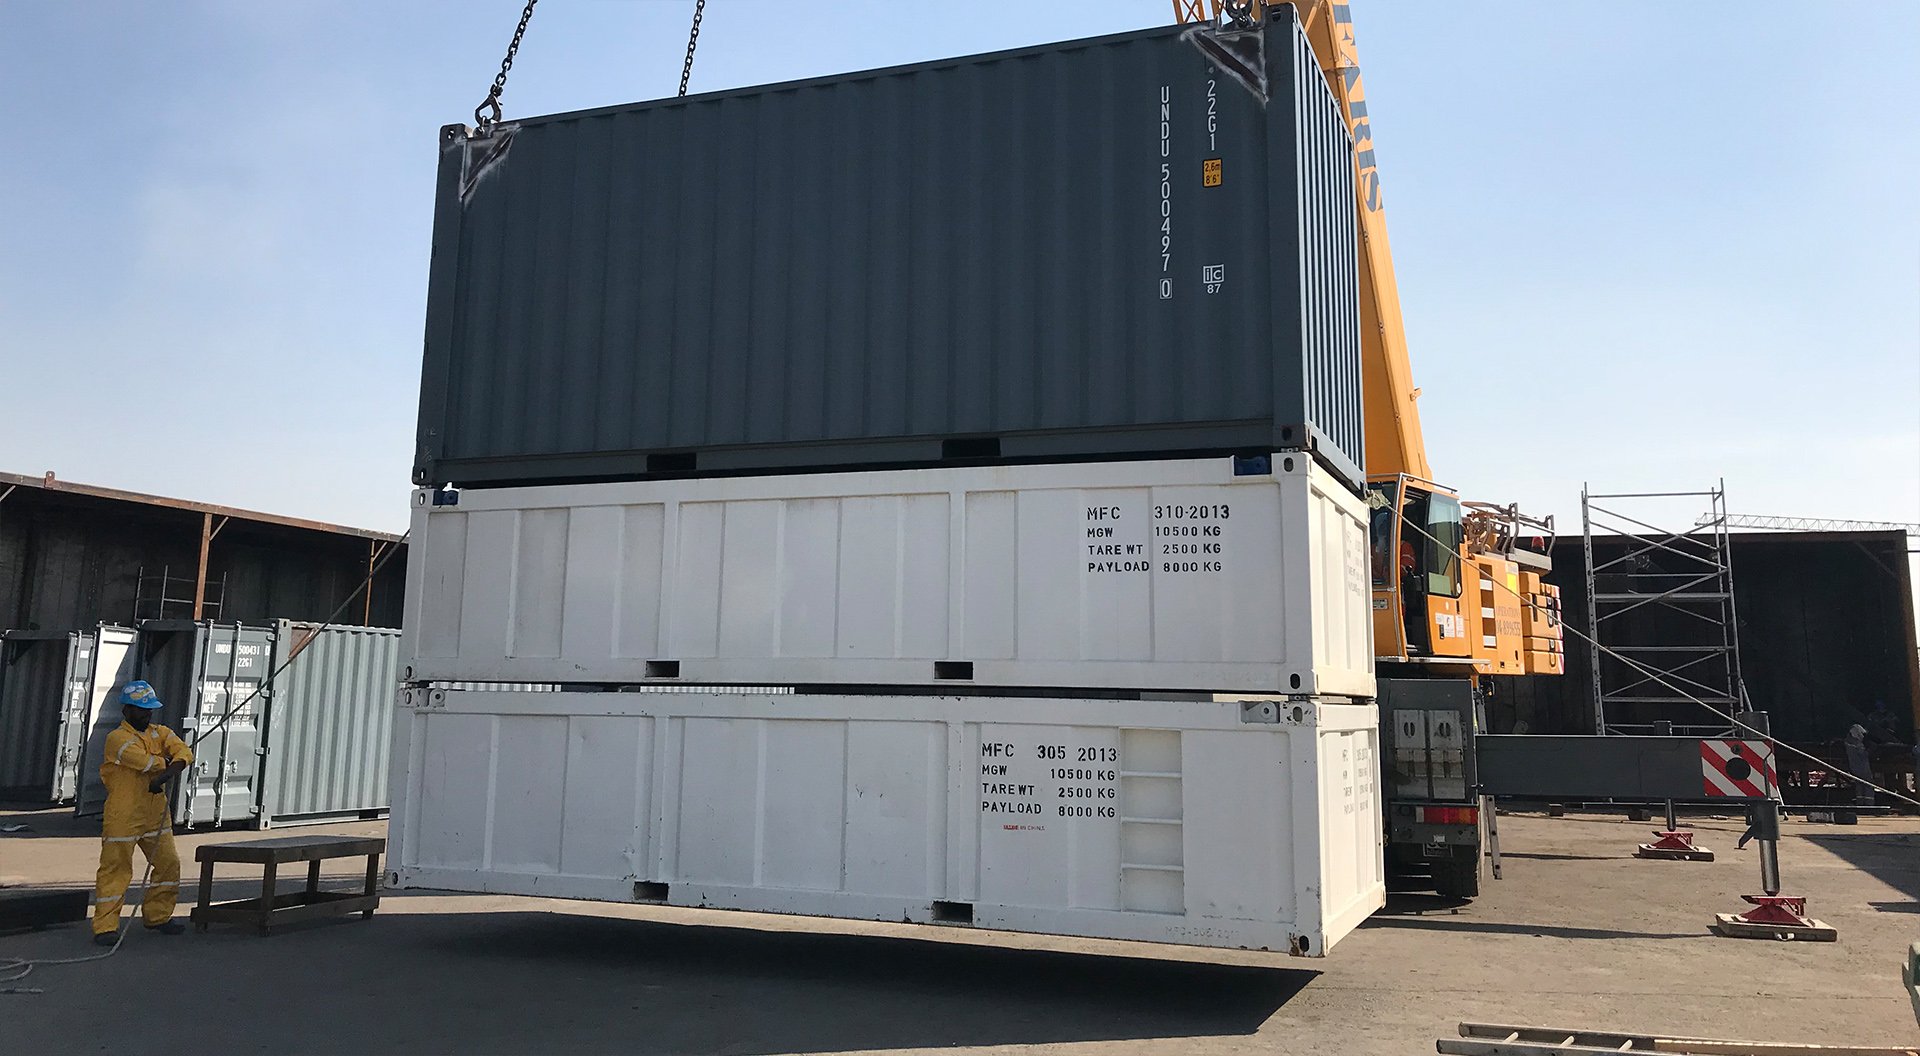 shipping container load testing Dubai